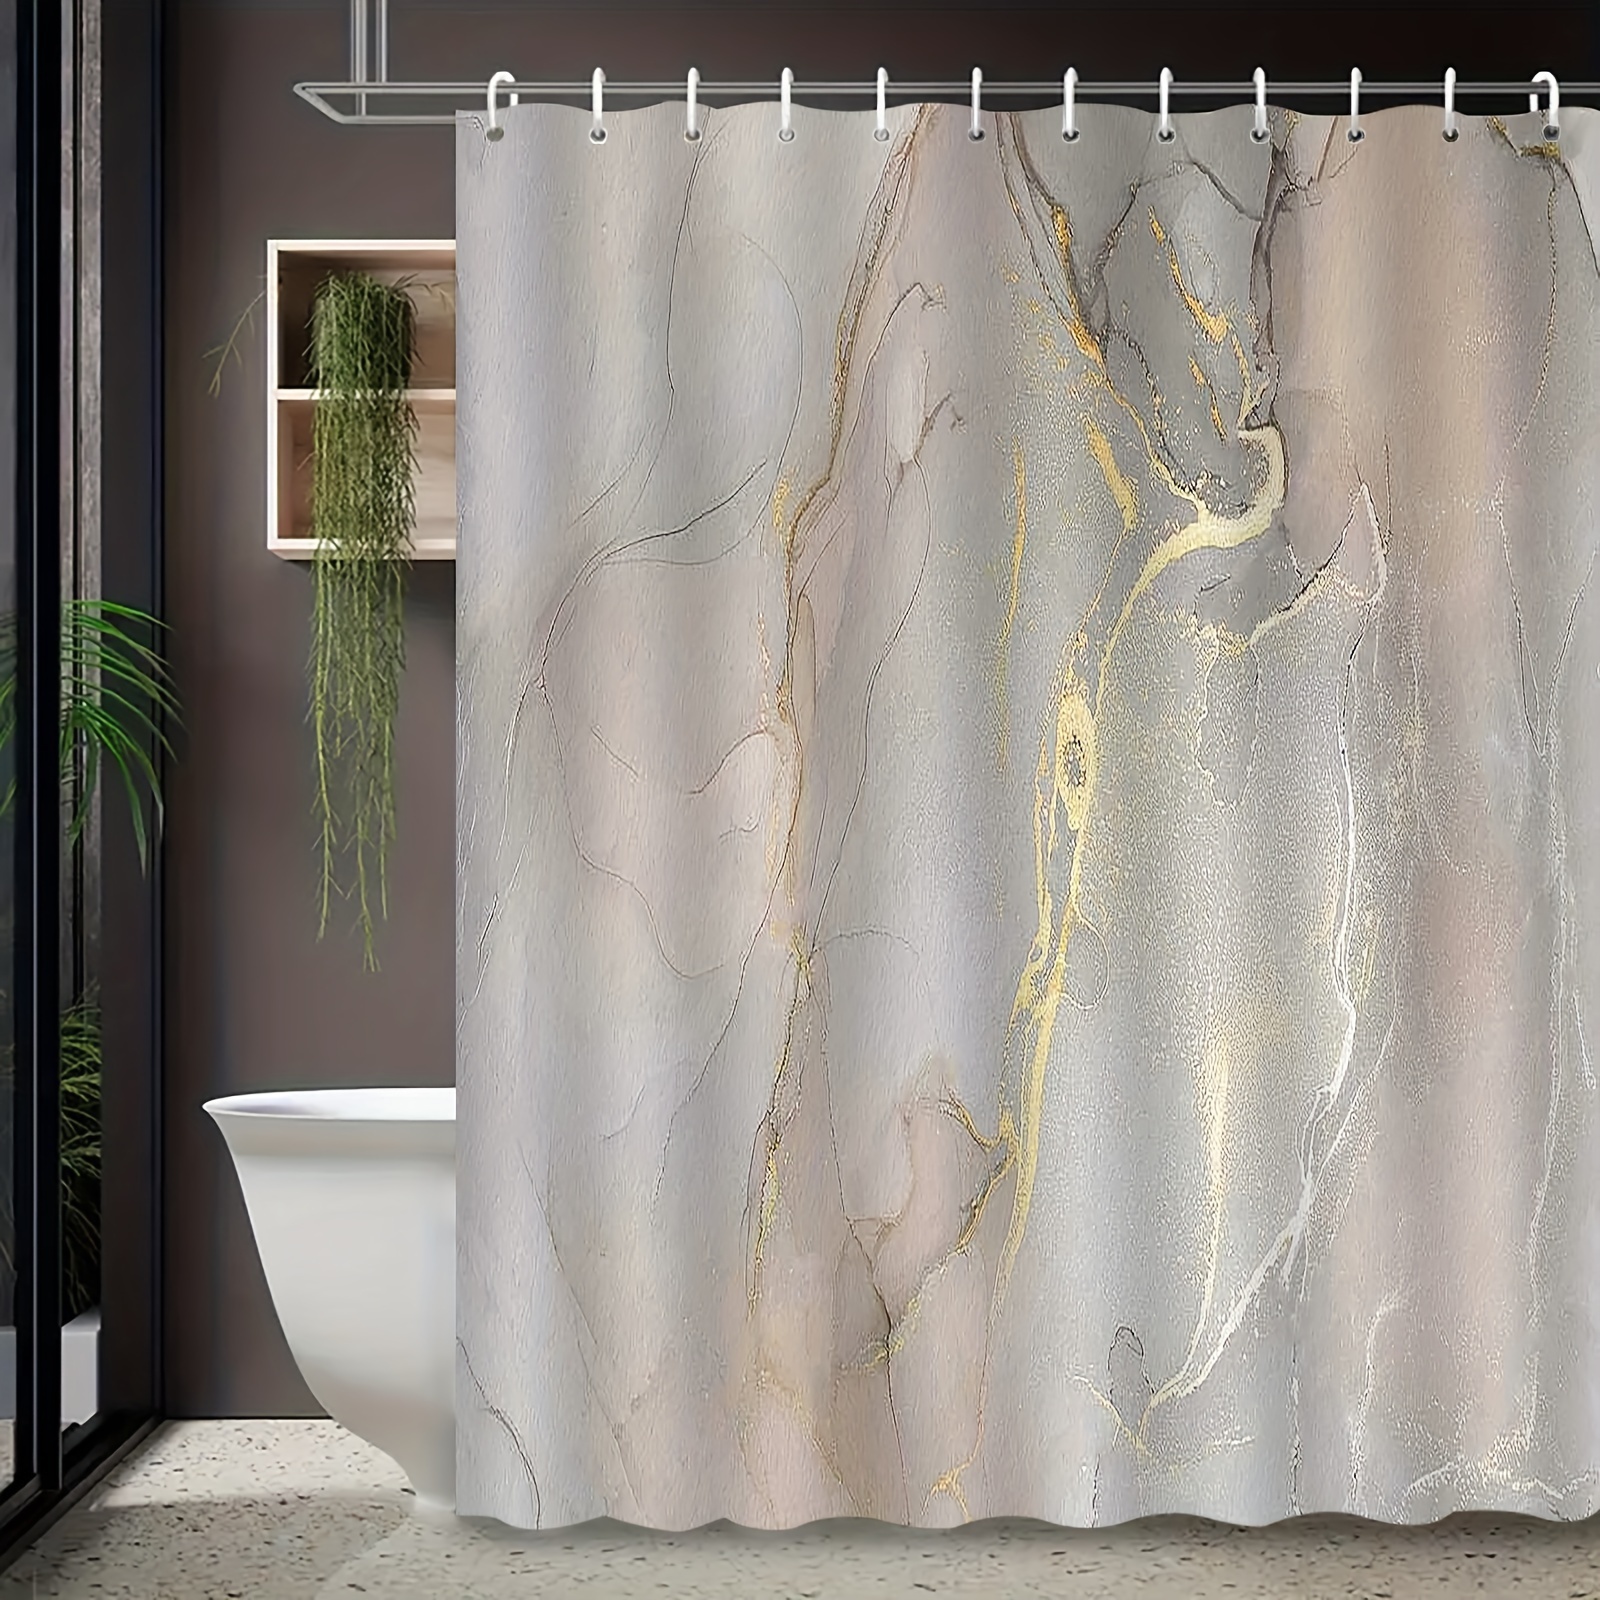 

Elegant Marble Pattern Shower Curtain - Waterproof & Mildew Resistant With 12 Hooks, Polyester Fabric For Bathroom Decor